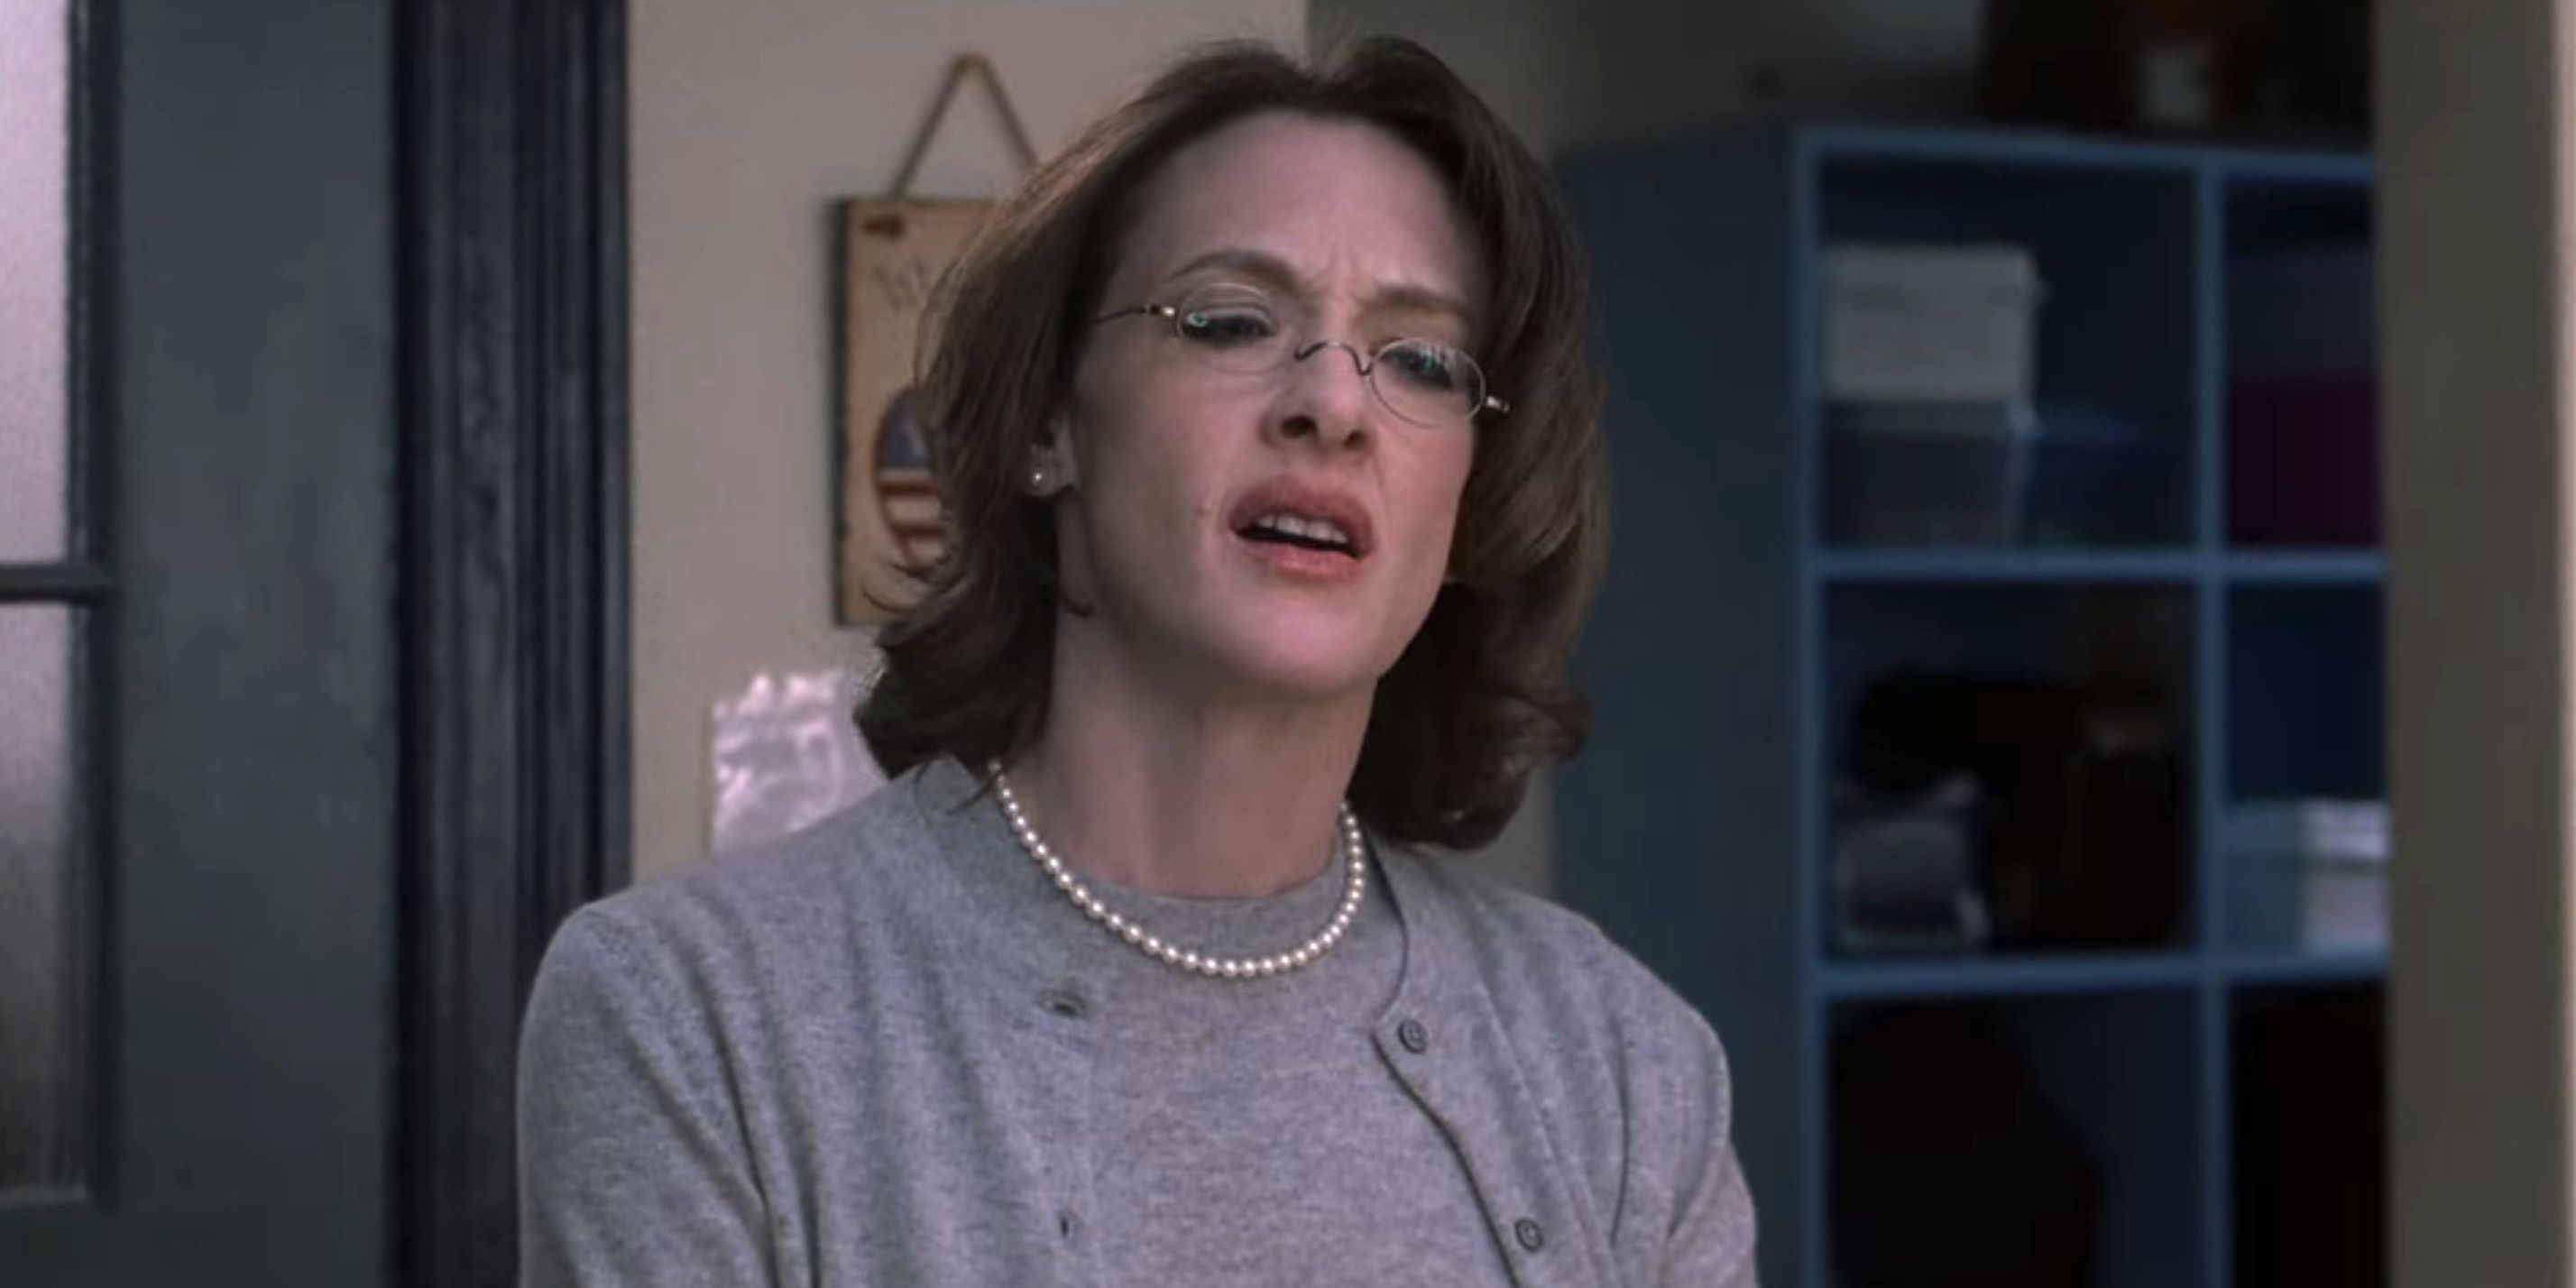 8. How to Style Your Hair Like Joan Cusack in "School of Rock" - wide 8